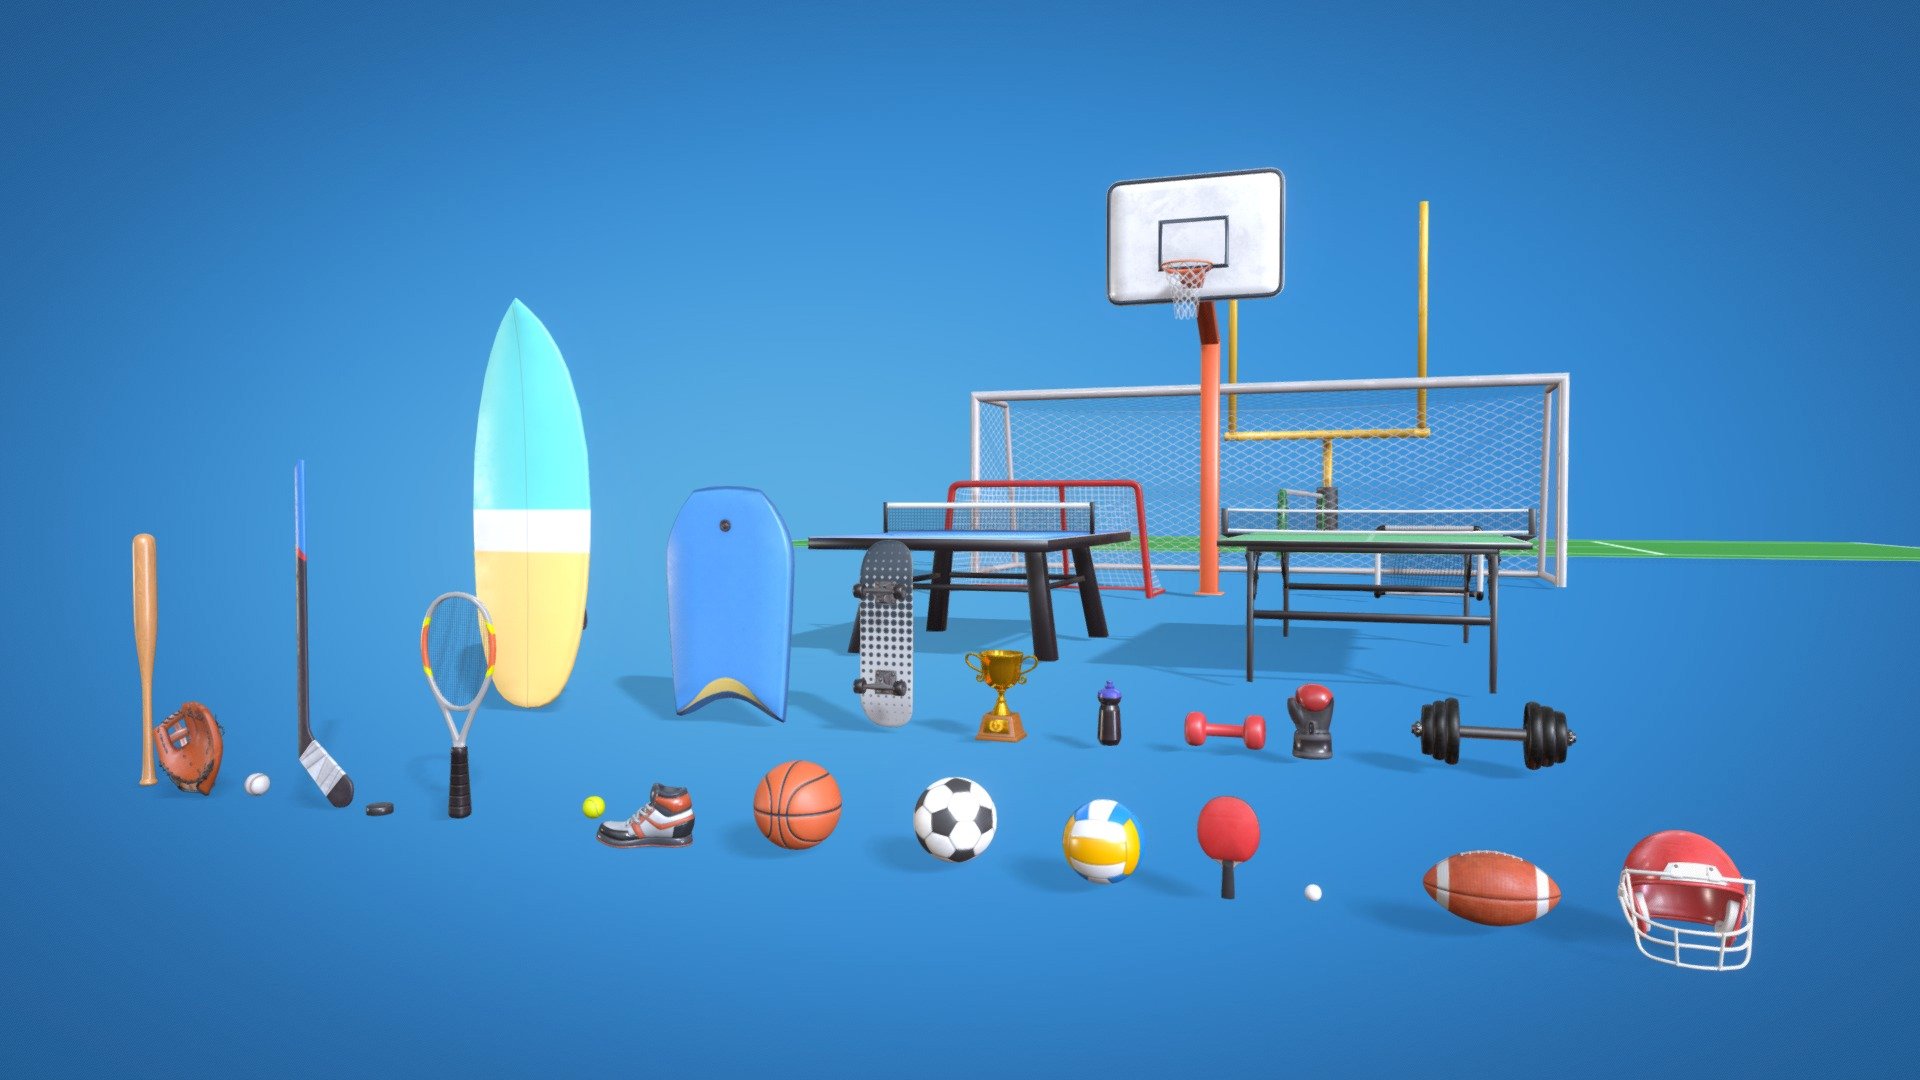 Immerse yourself in the thrilling world of sports with our latest 3D Sports Pack. This comprehensive collection features a variety of stylized 3D models spanning basketball, ping-pong, football  soccer, baseball, boxing, american football, surfing, and more! Perfect for injecting a touch of creativity into your projects, whether they're video games, motion graphics videos, advertising campaigns, short films, etc.

Transform your creative endeavors with Estudio Shout’s 3D Sports Pack – where the spirited world of sports meets the charm of stylized 3D design.



PRODUCT INFORMATION




31 unique models

Formats: FBX, OBJ and .blend

31 PBR texture sets in 4k resolution

Please download the provided .zip file &ldquo;Sports_Pack_Sketchfab.zip